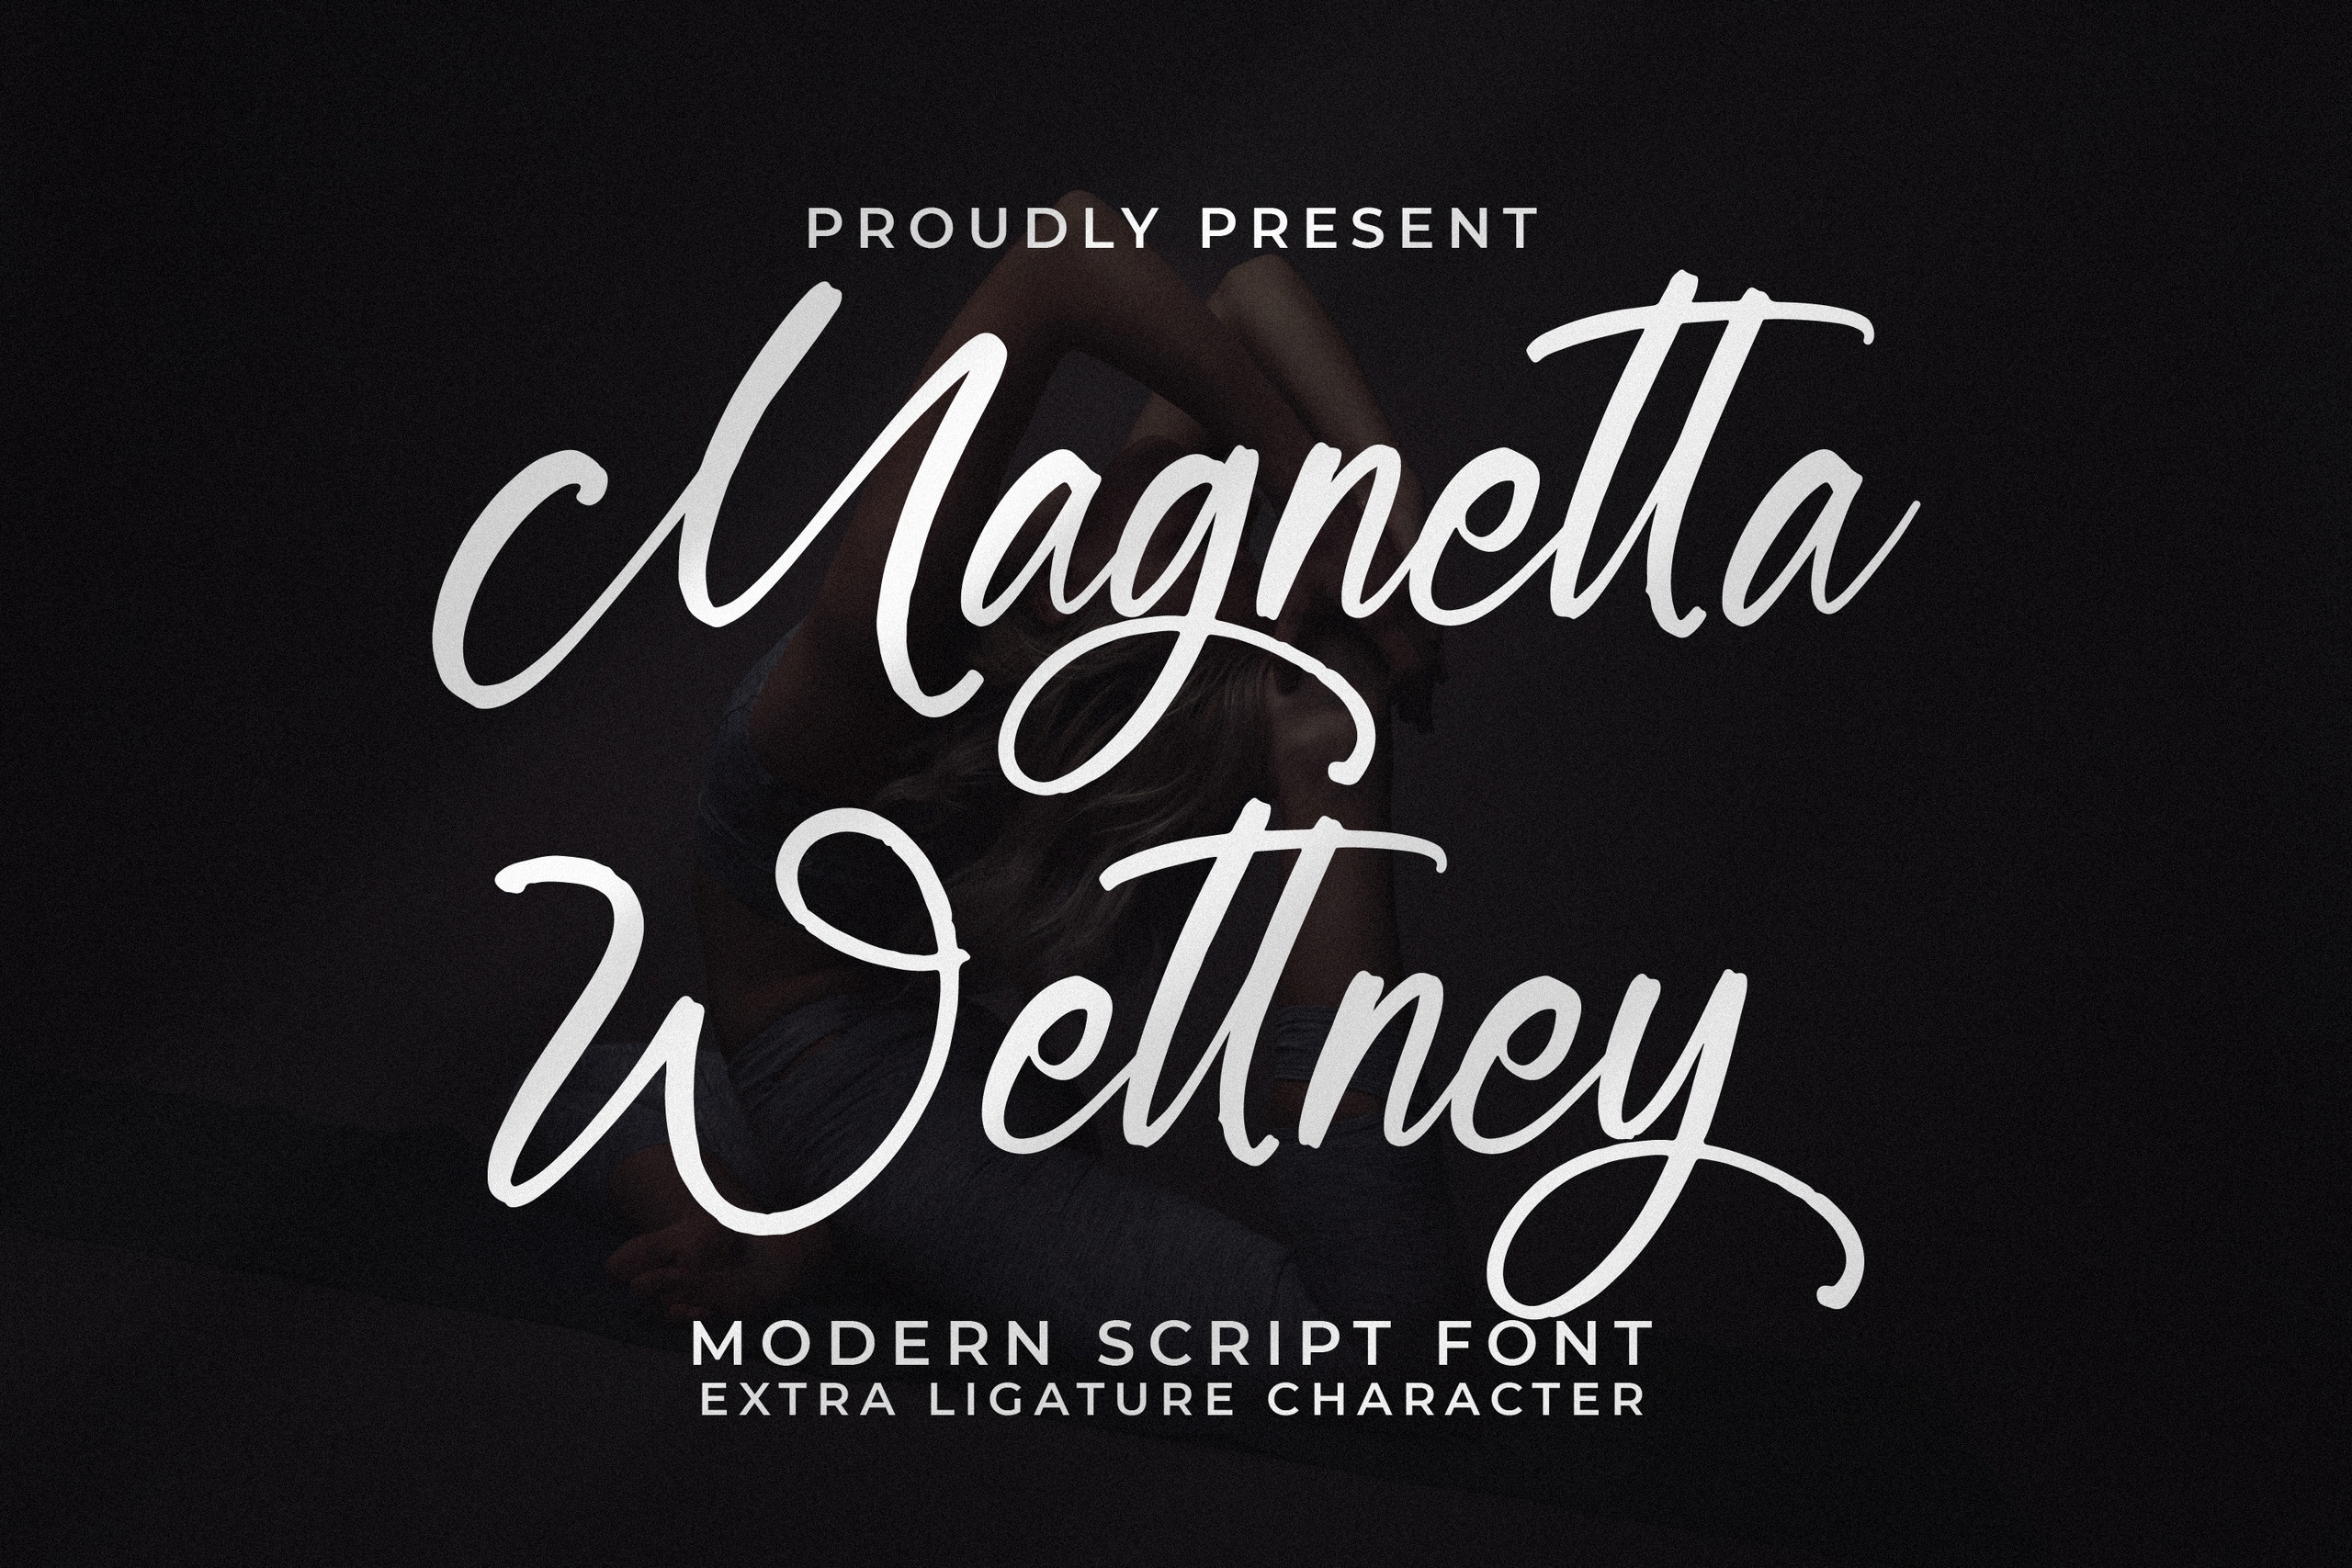 Magnetta Wettney font preview image #2